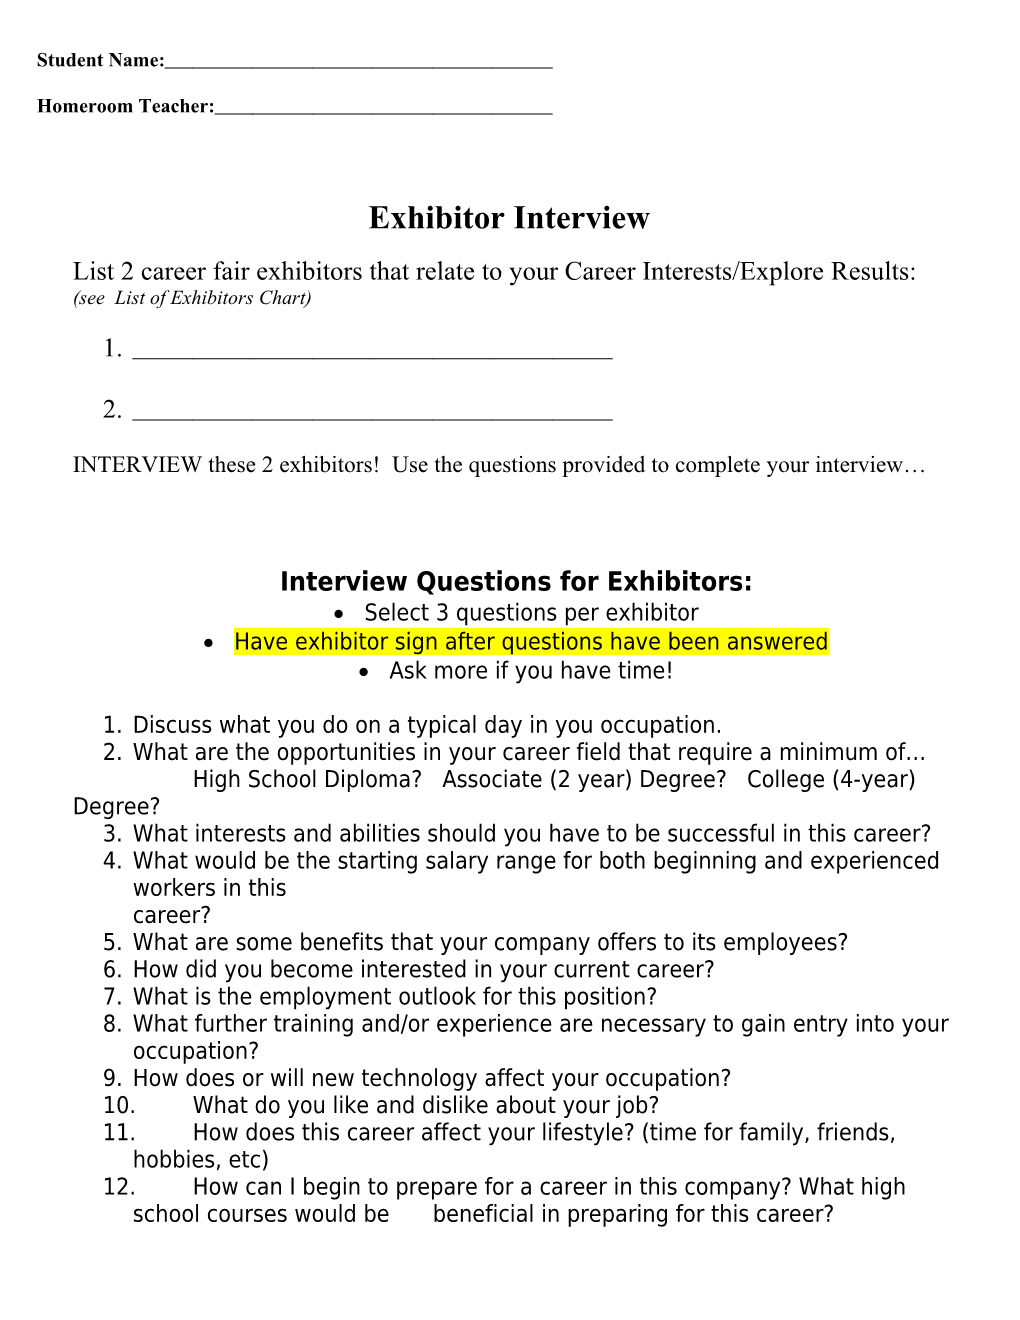 Interview Questions for Exhibitors